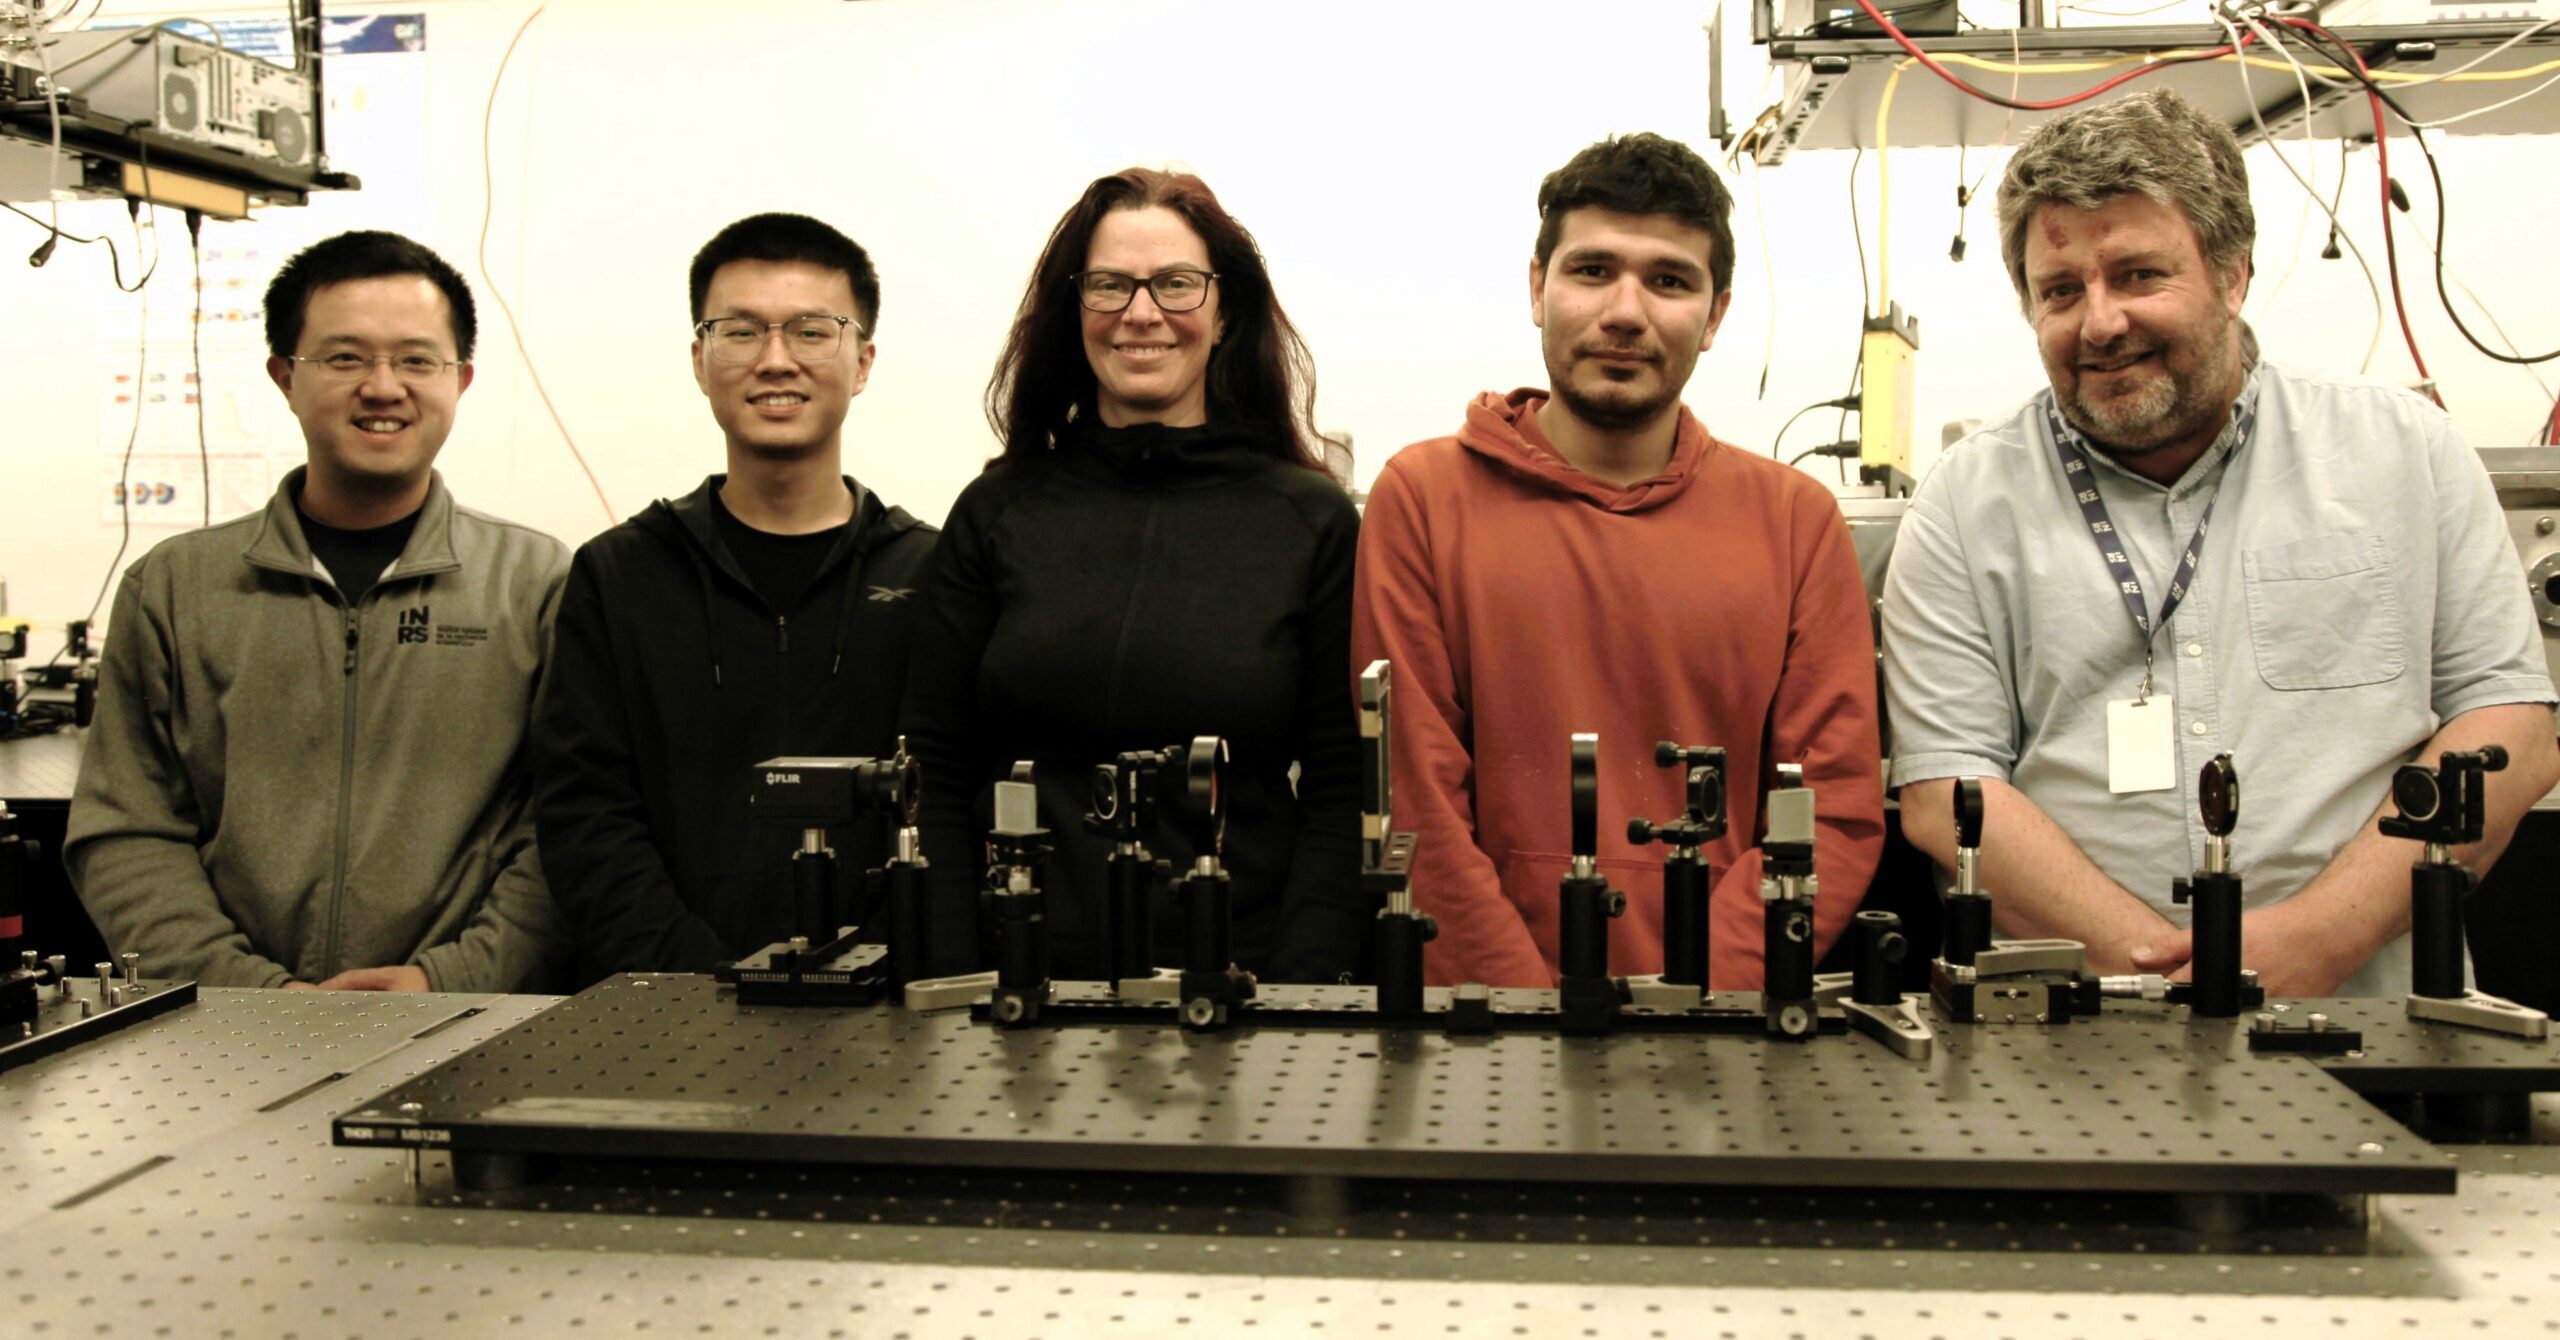 From left to right: Professor Jinyang Liang, Yingming Lai, PhD student in energy and materials science, Heide Ibrahim, Director of ALLS, Miguel Marquez, postdoctoral fellow and co-author of the study, and Professor François Légaré in front of the SCARF system at INRS.